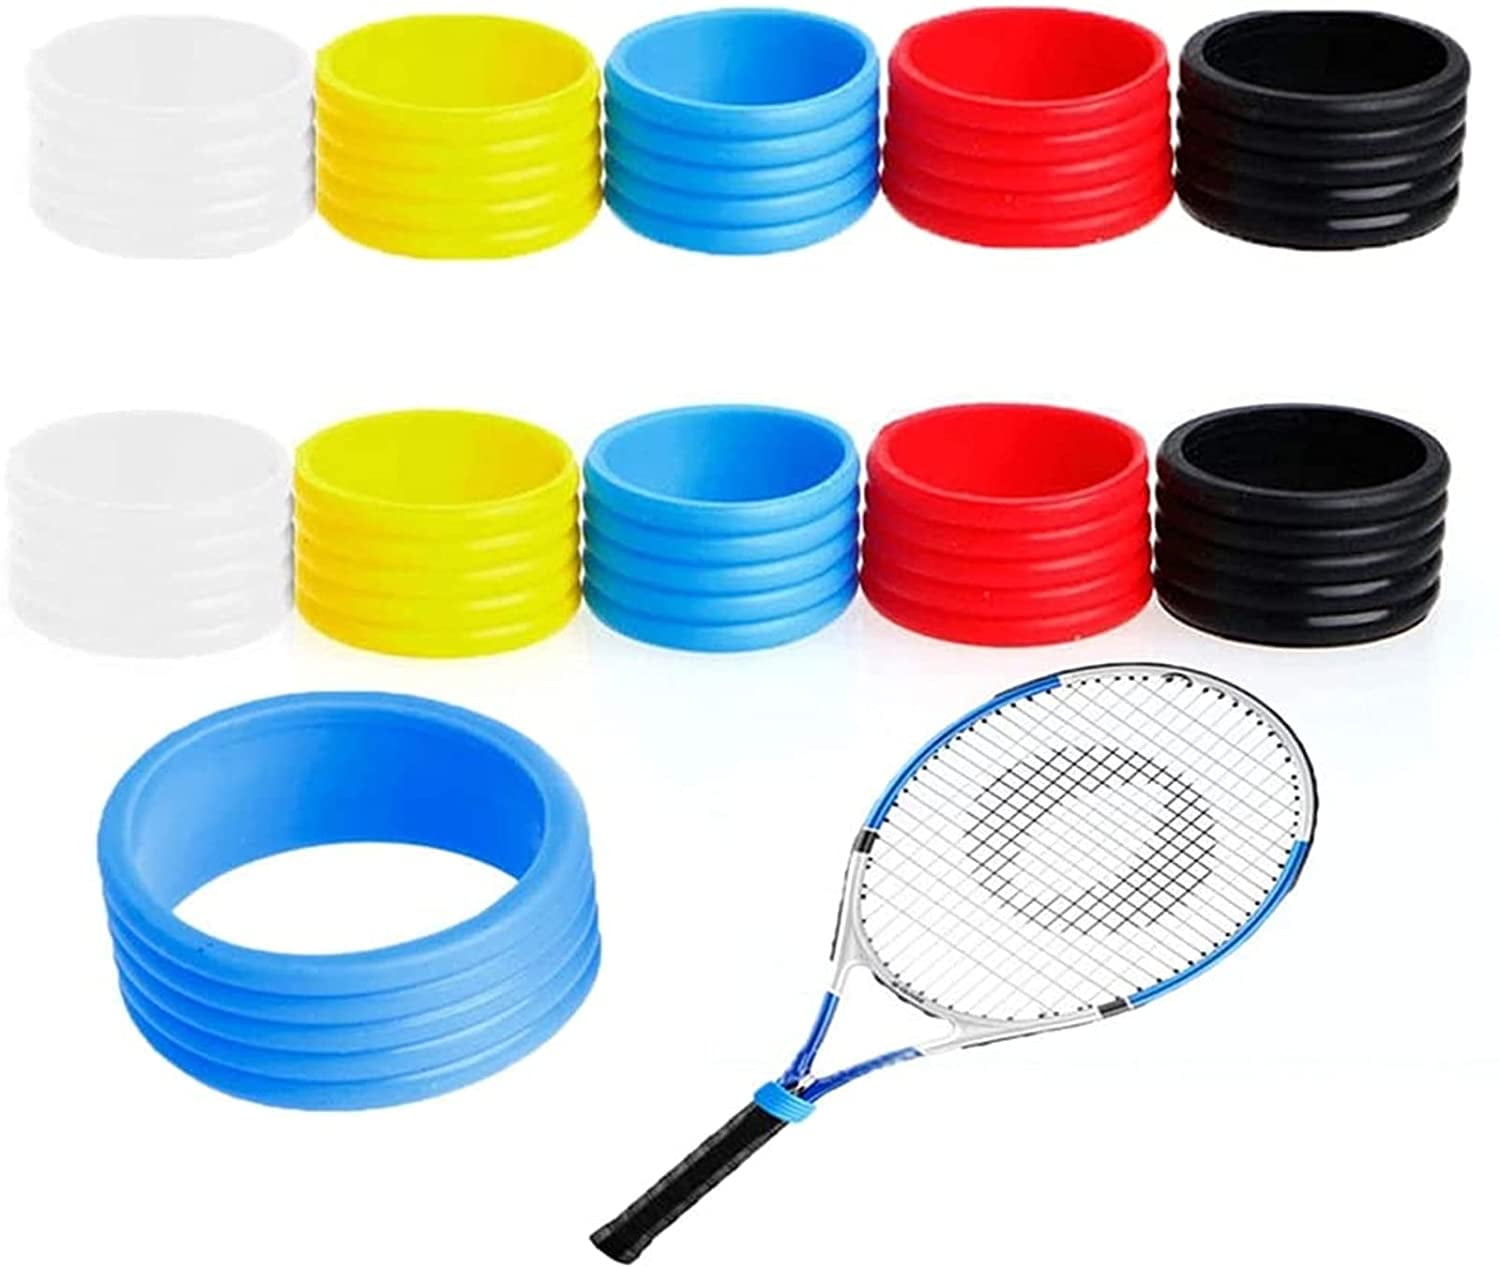 10 pcs Tennis Racquet Racket Overgrip for a sports fan many color to choose 